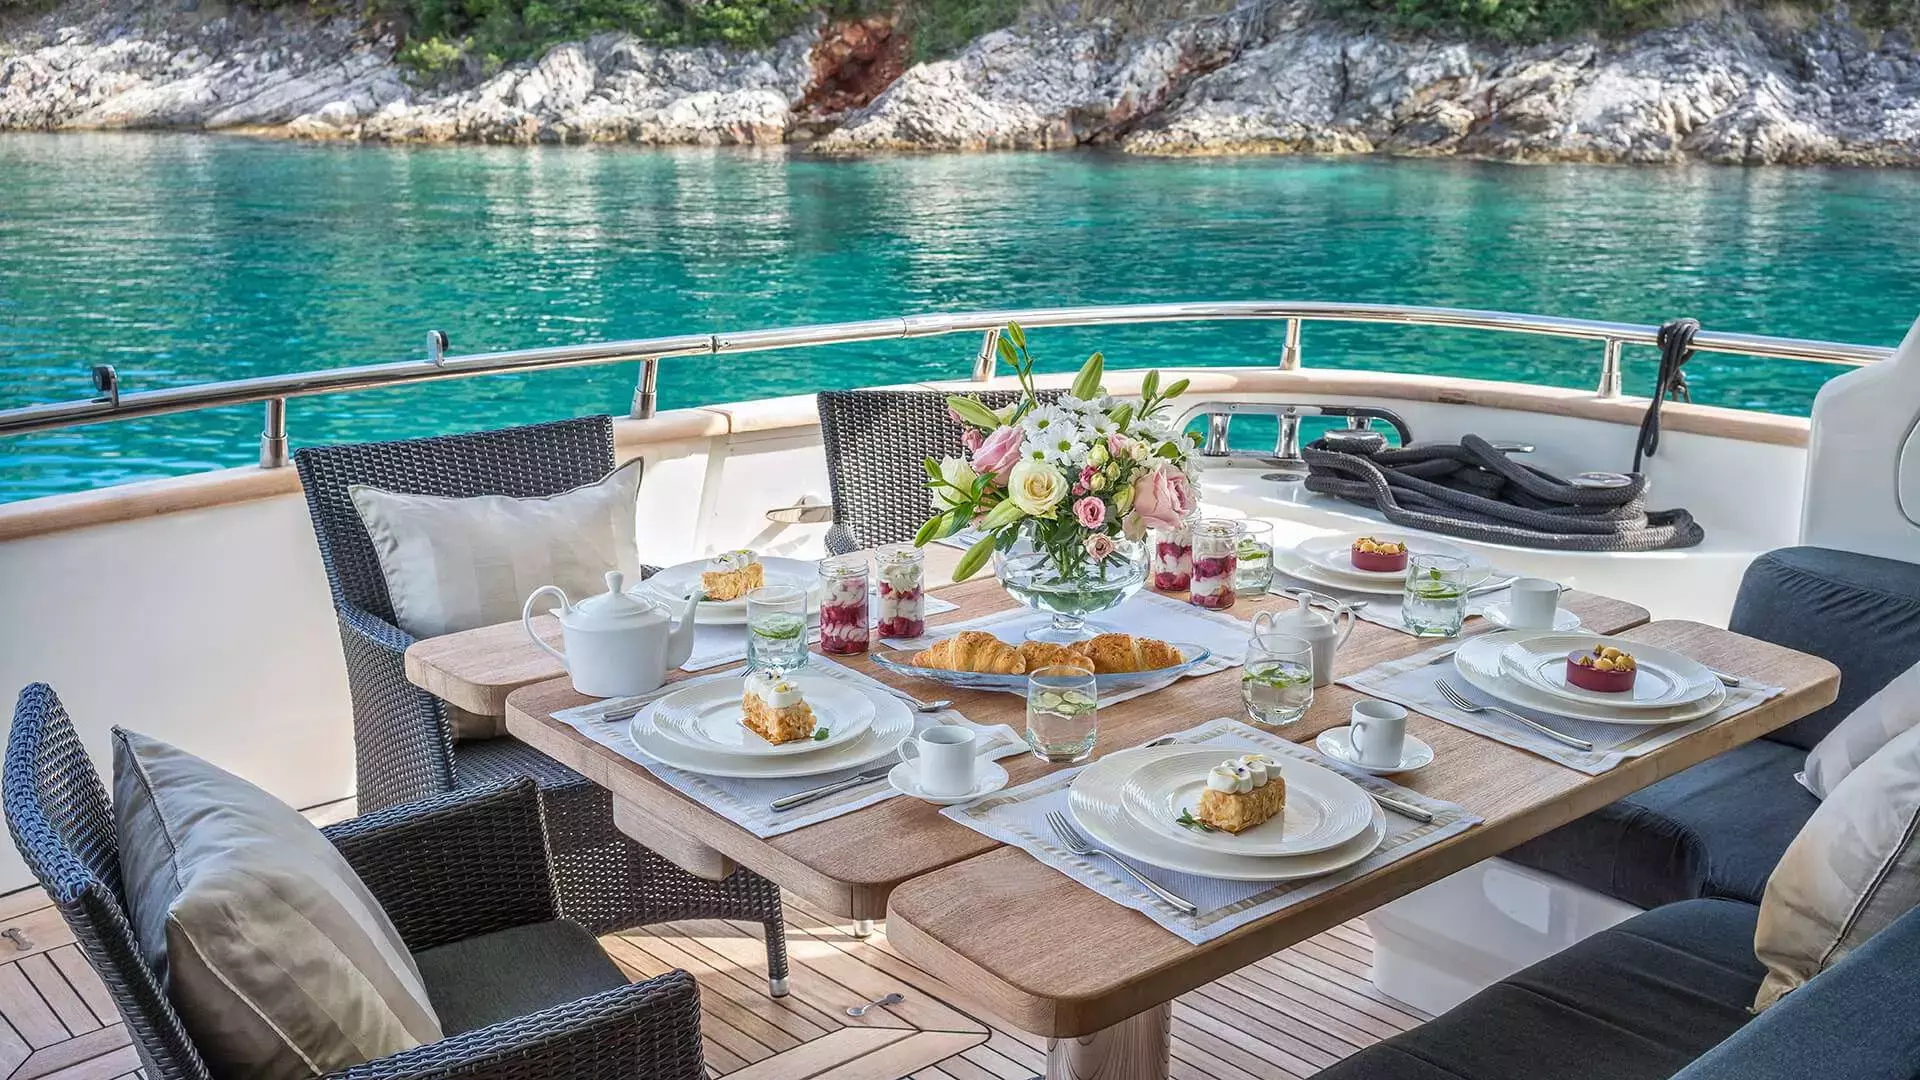 Jantar by Maiora - Special Offer for a private Motor Yacht Charter in Krk with a crew